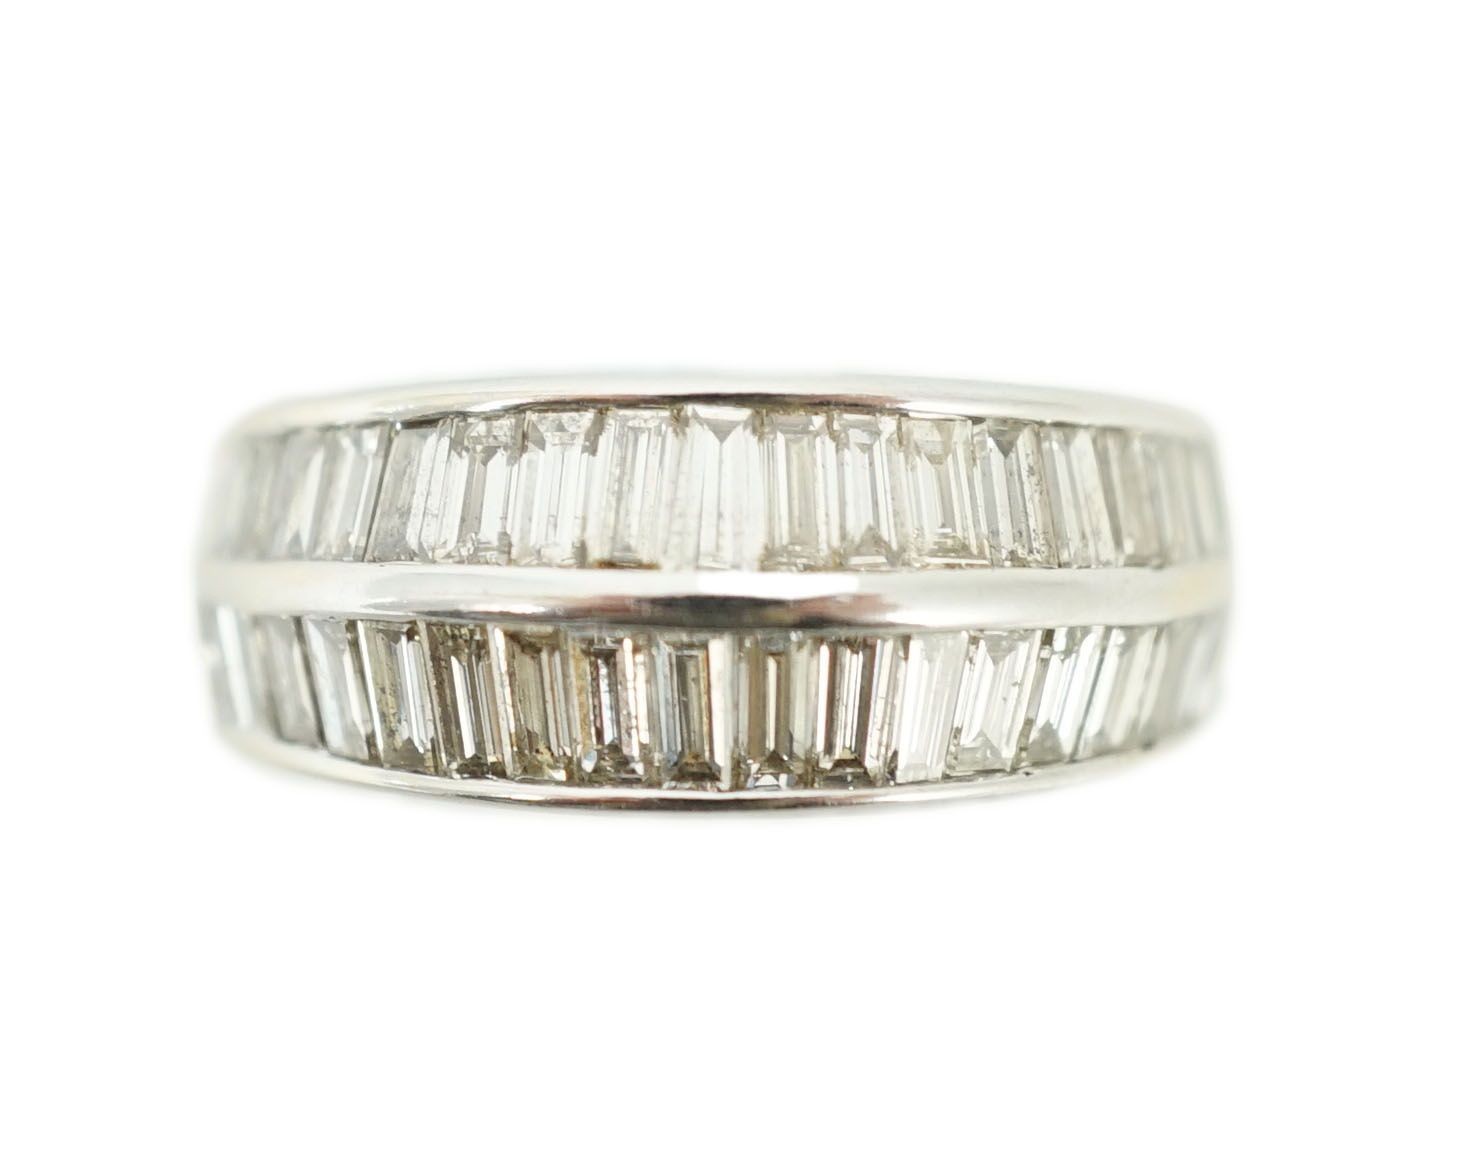 A modern 18k white gold and two row graduated baguette cut diamond set half hoop ring